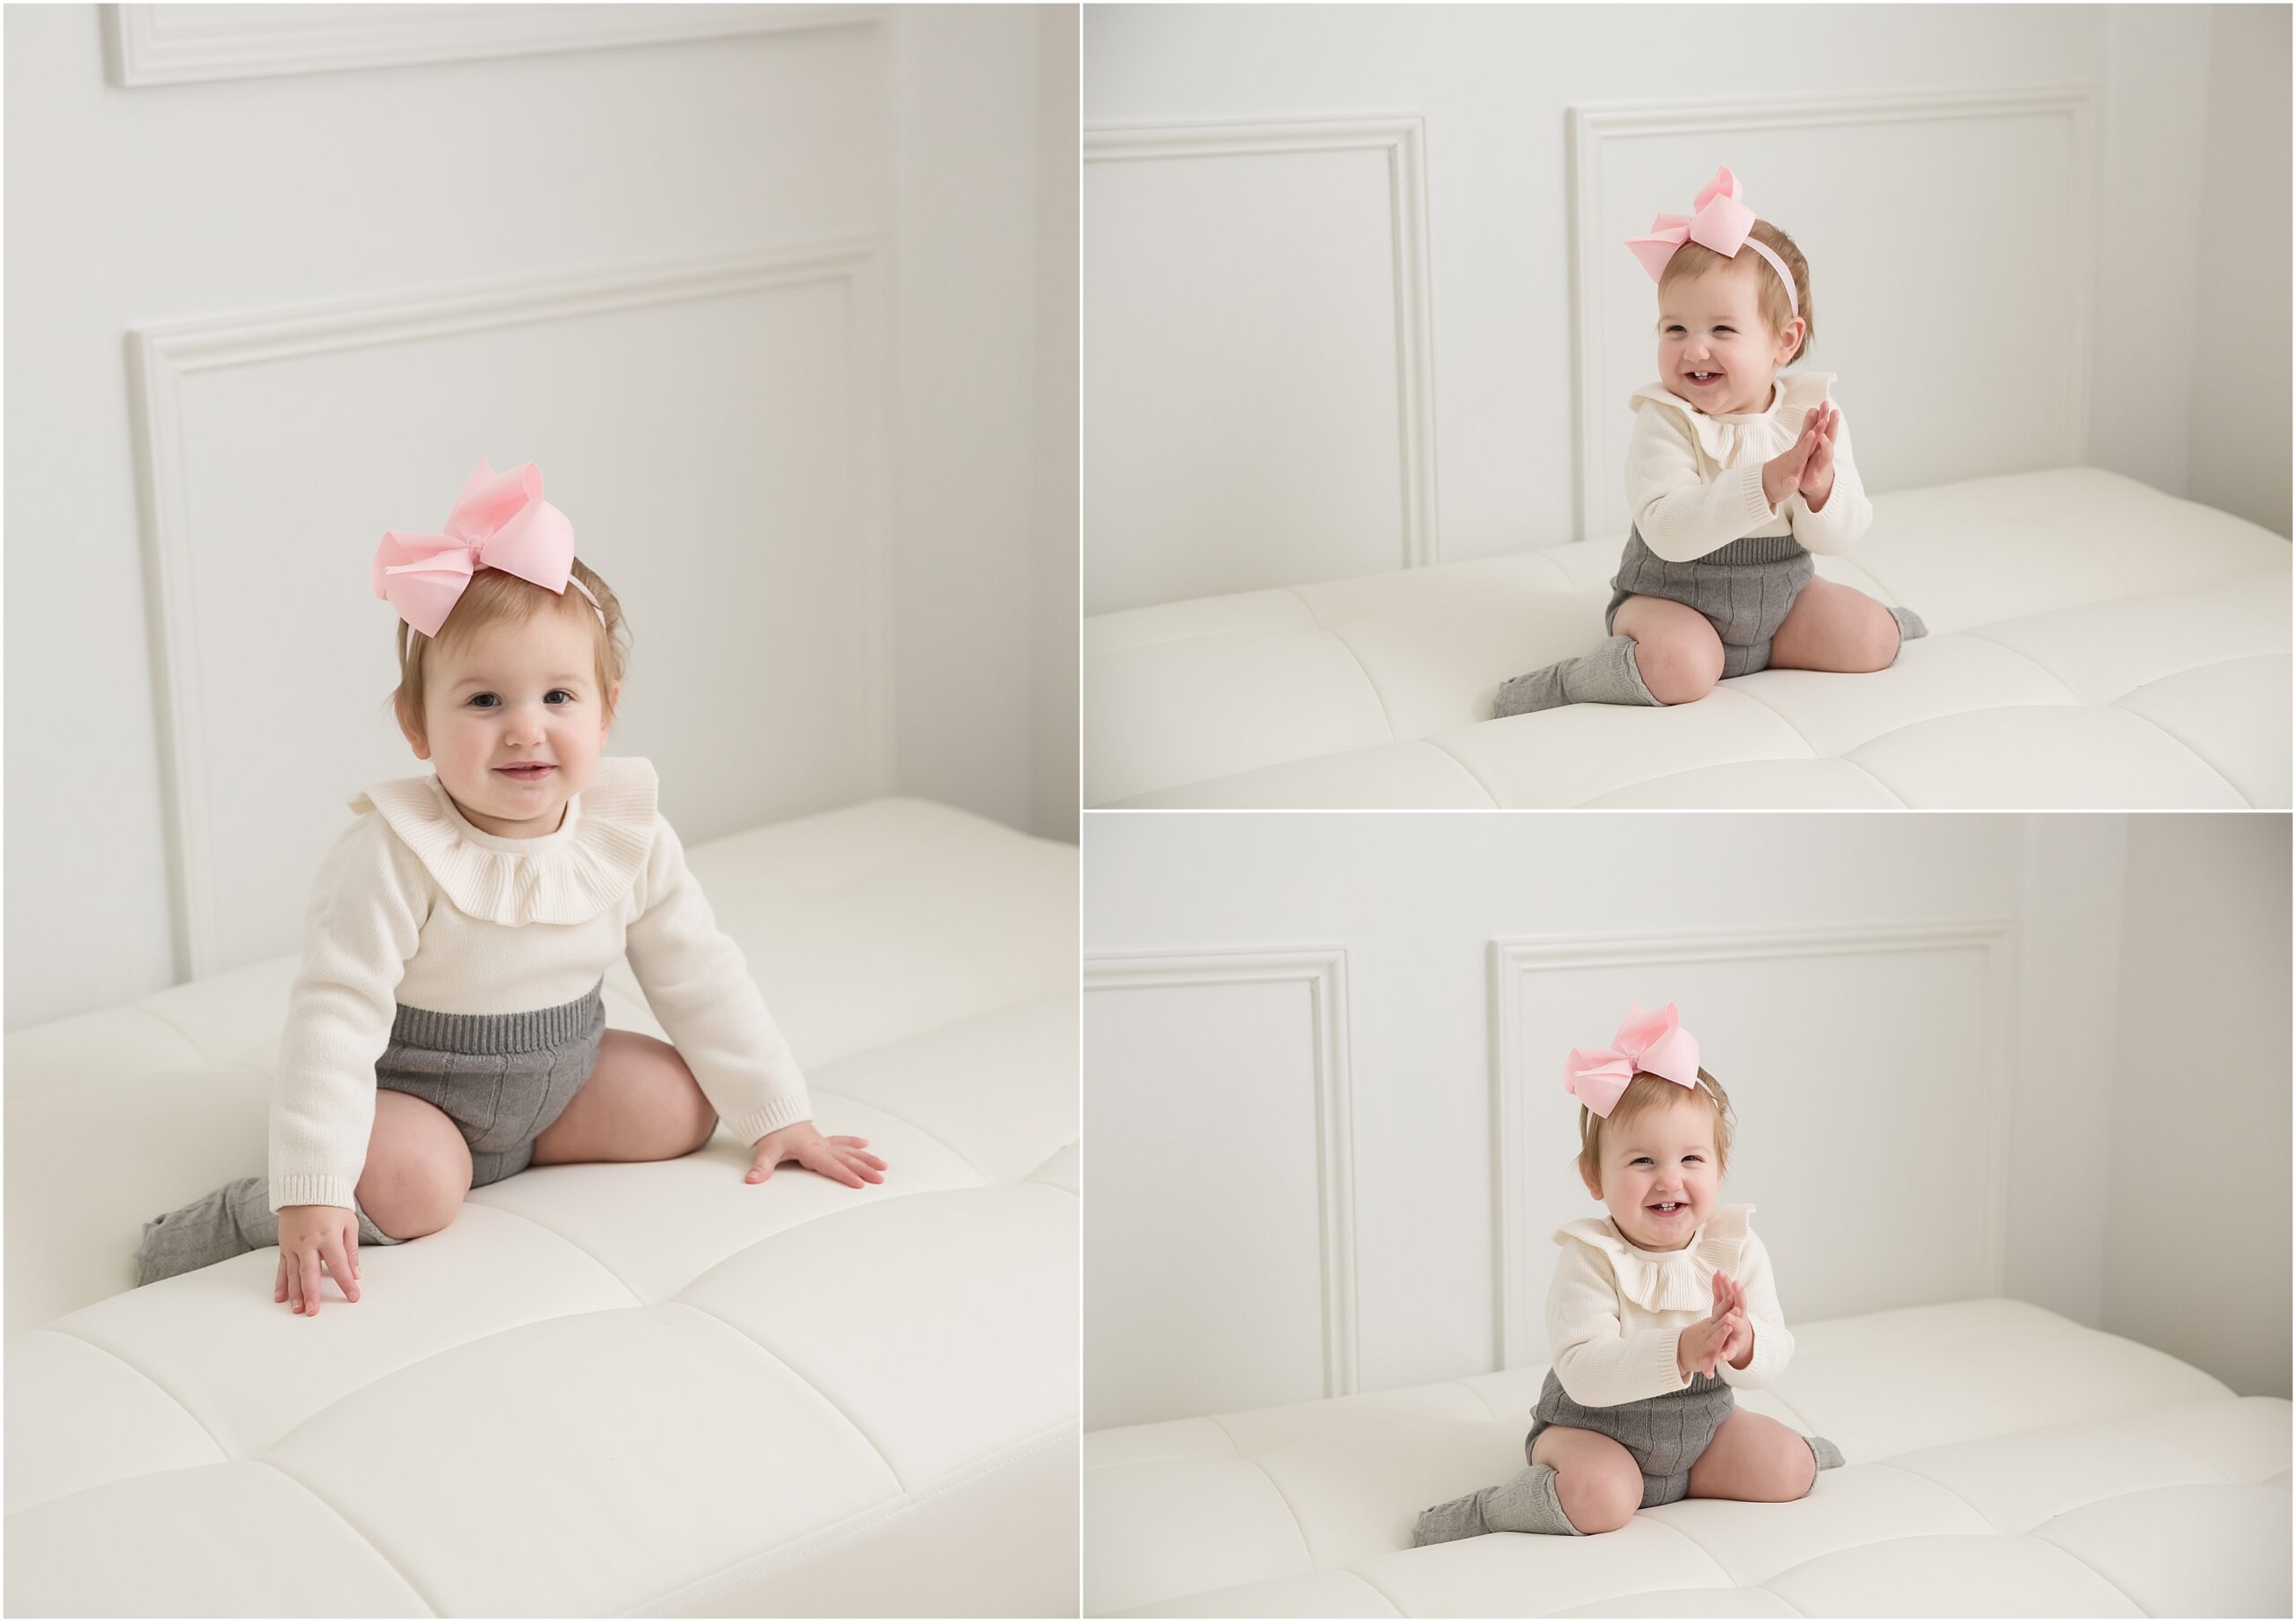 Collage of three photos of a cute one year old baby girl wearing a gray and white outfit and a pink bow.